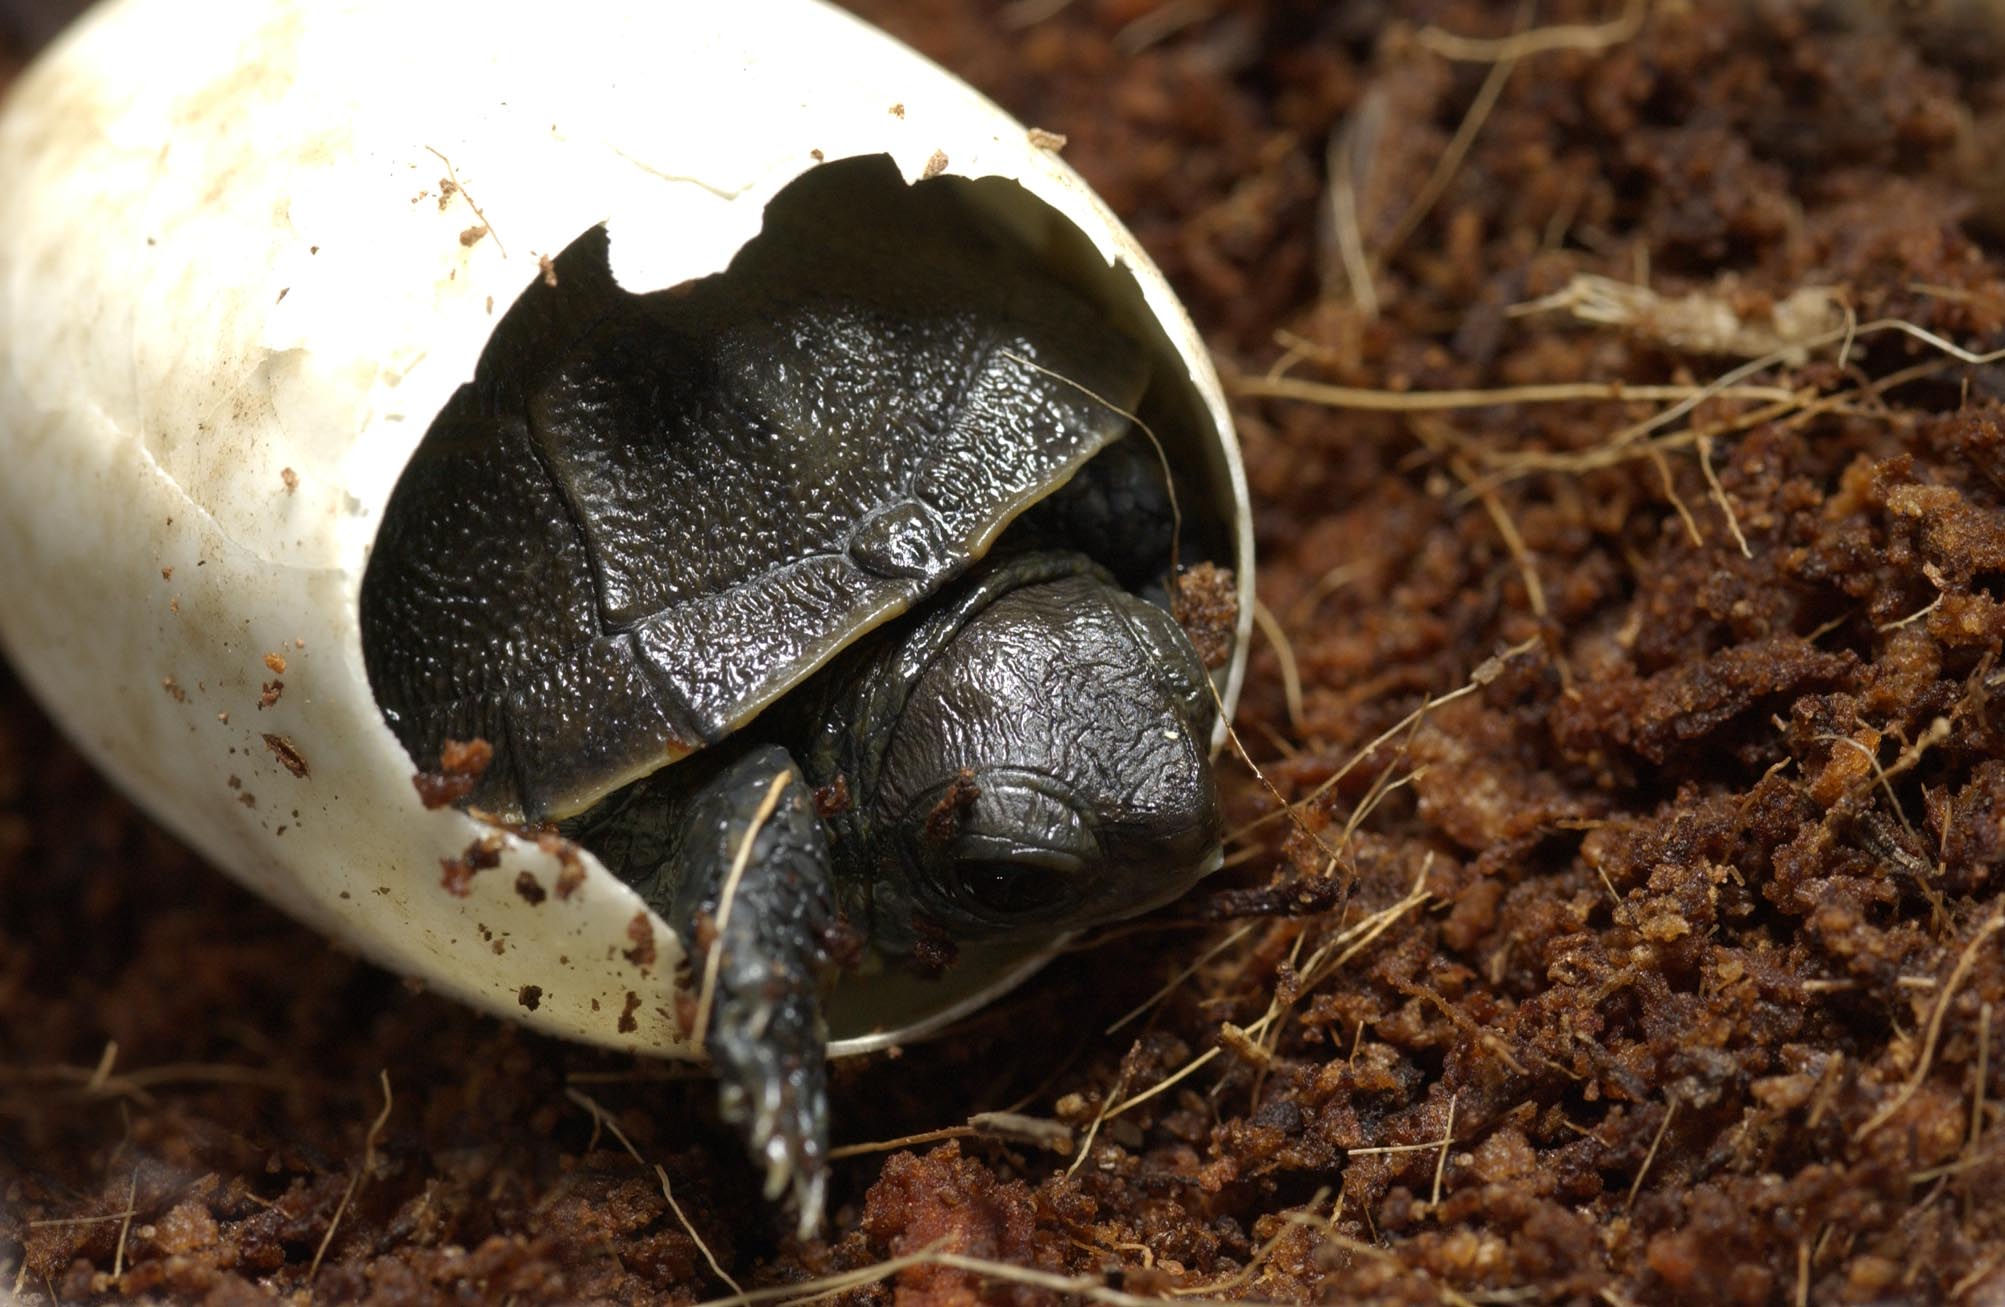 Oregon Zoo brings 20 baby turtles to conservation lab 